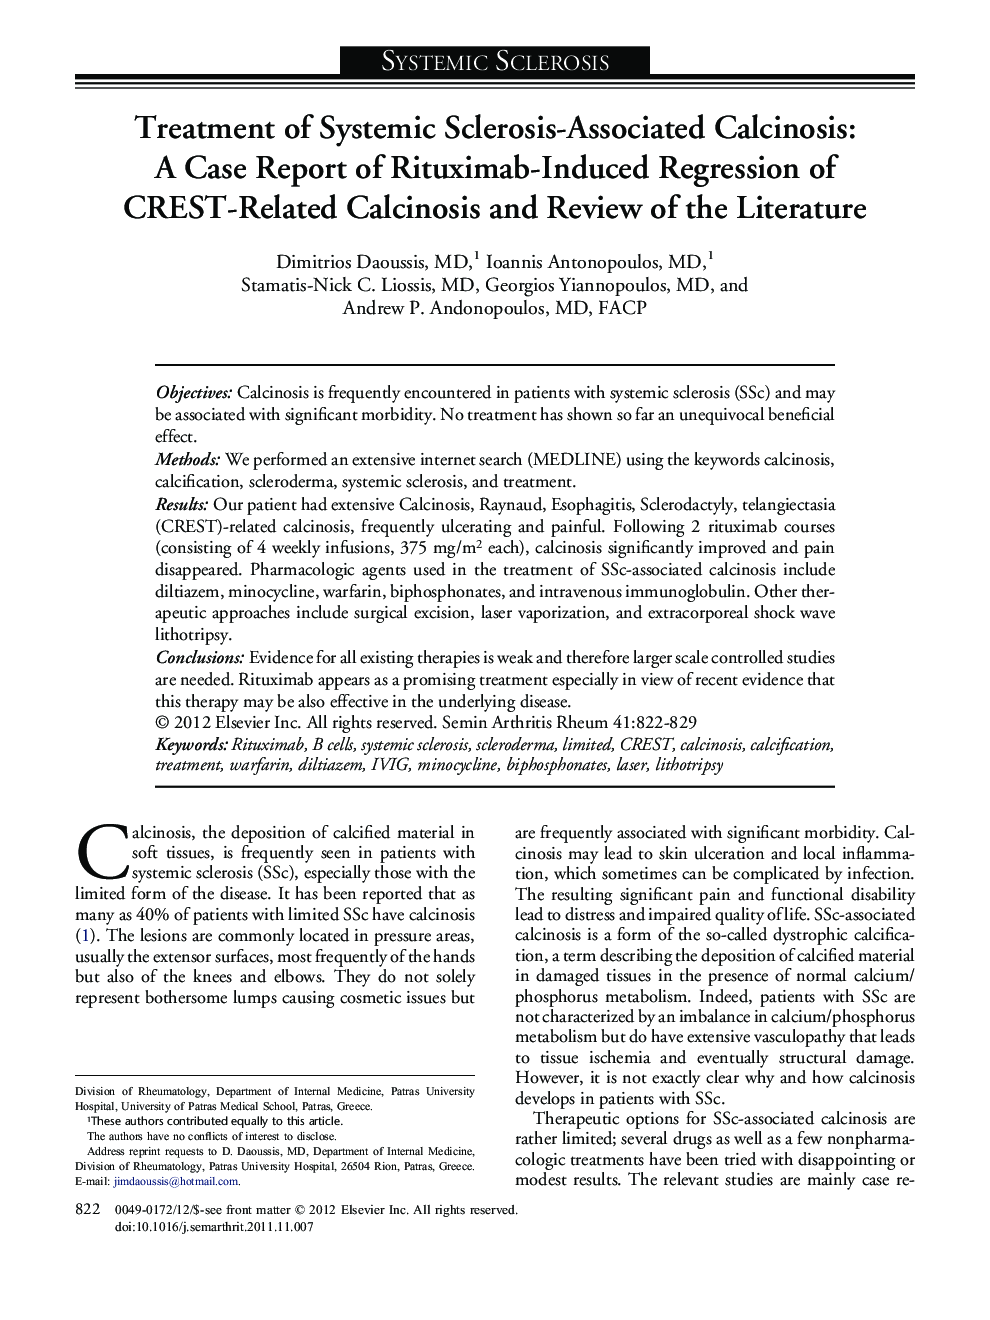 Treatment of Systemic Sclerosis-Associated Calcinosis: A Case Report of Rituximab-Induced Regression of CREST-Related Calcinosis and Review of the Literature 